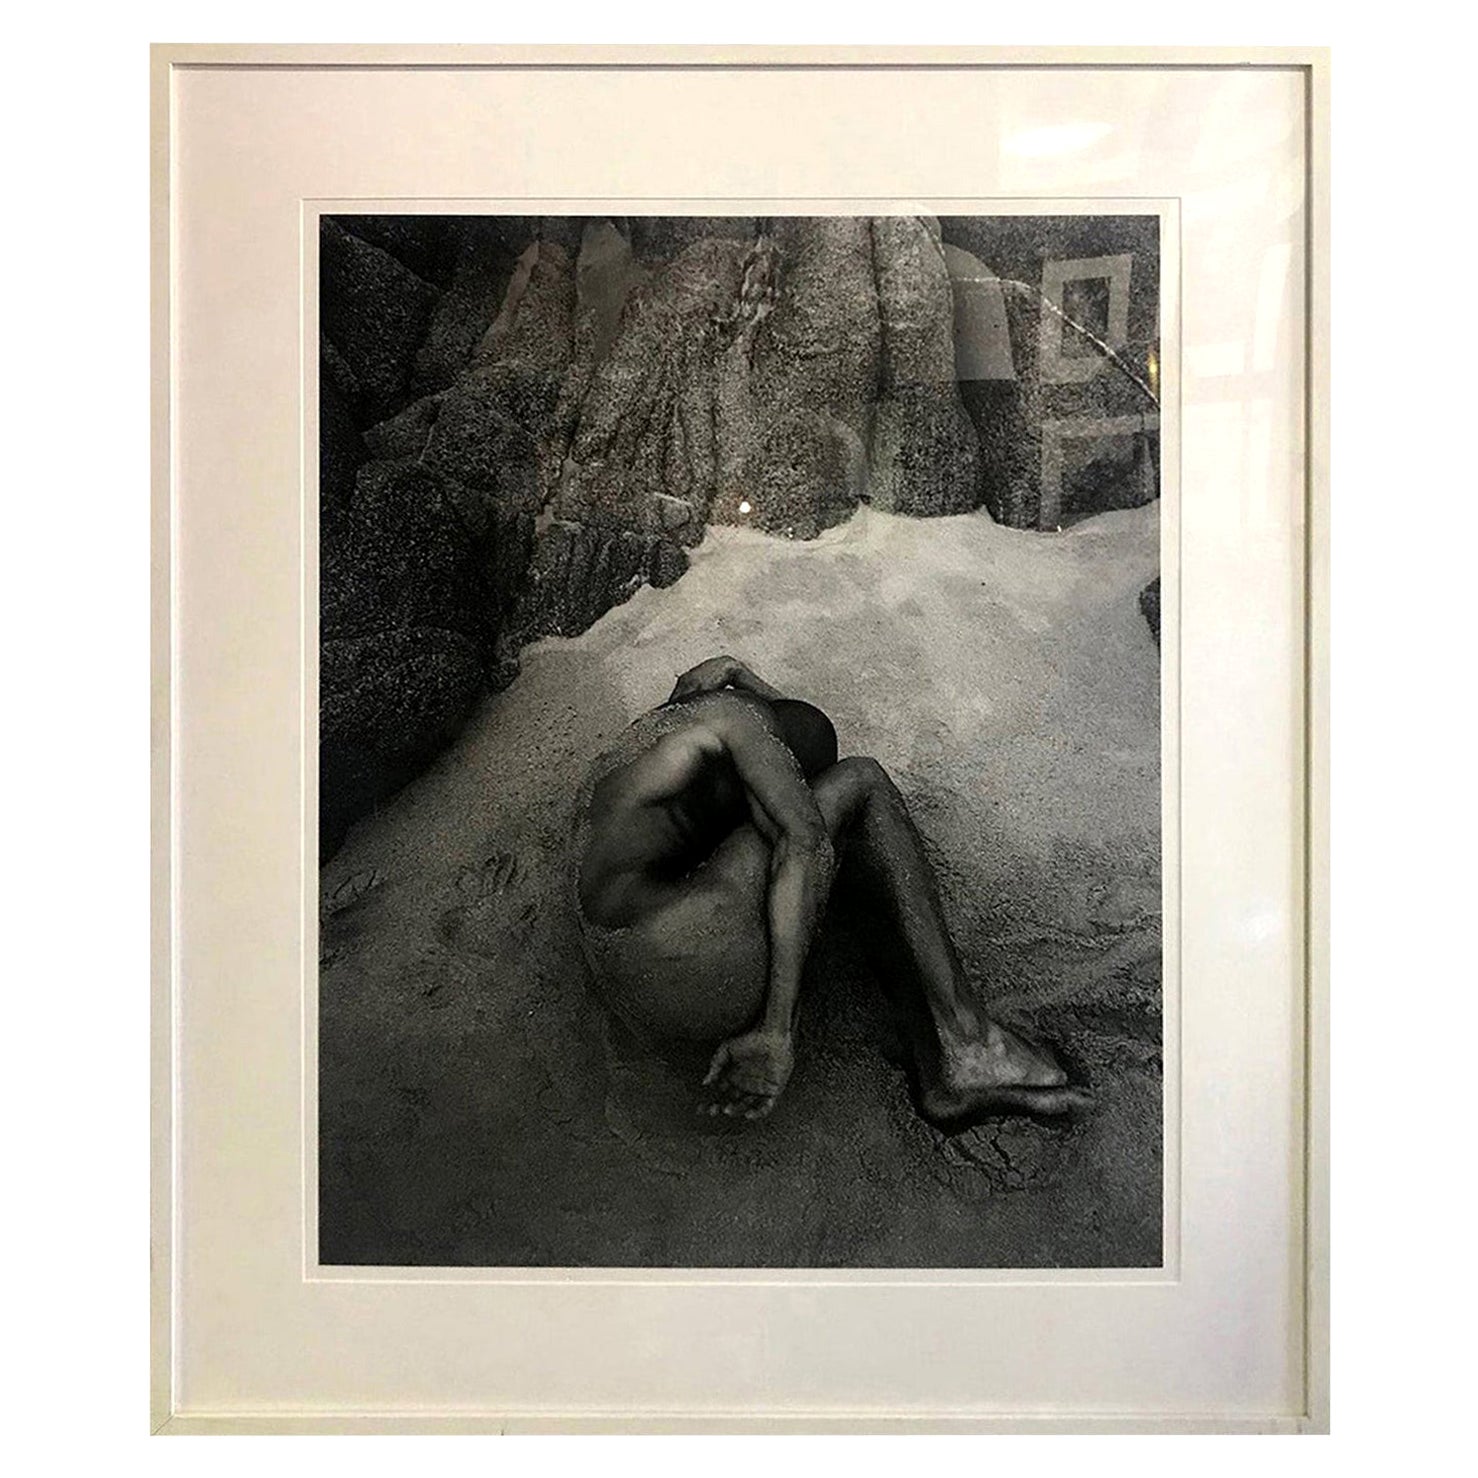 Cliff Watts Large Silver Gelatin Photograph Print of Nude Male on Beach